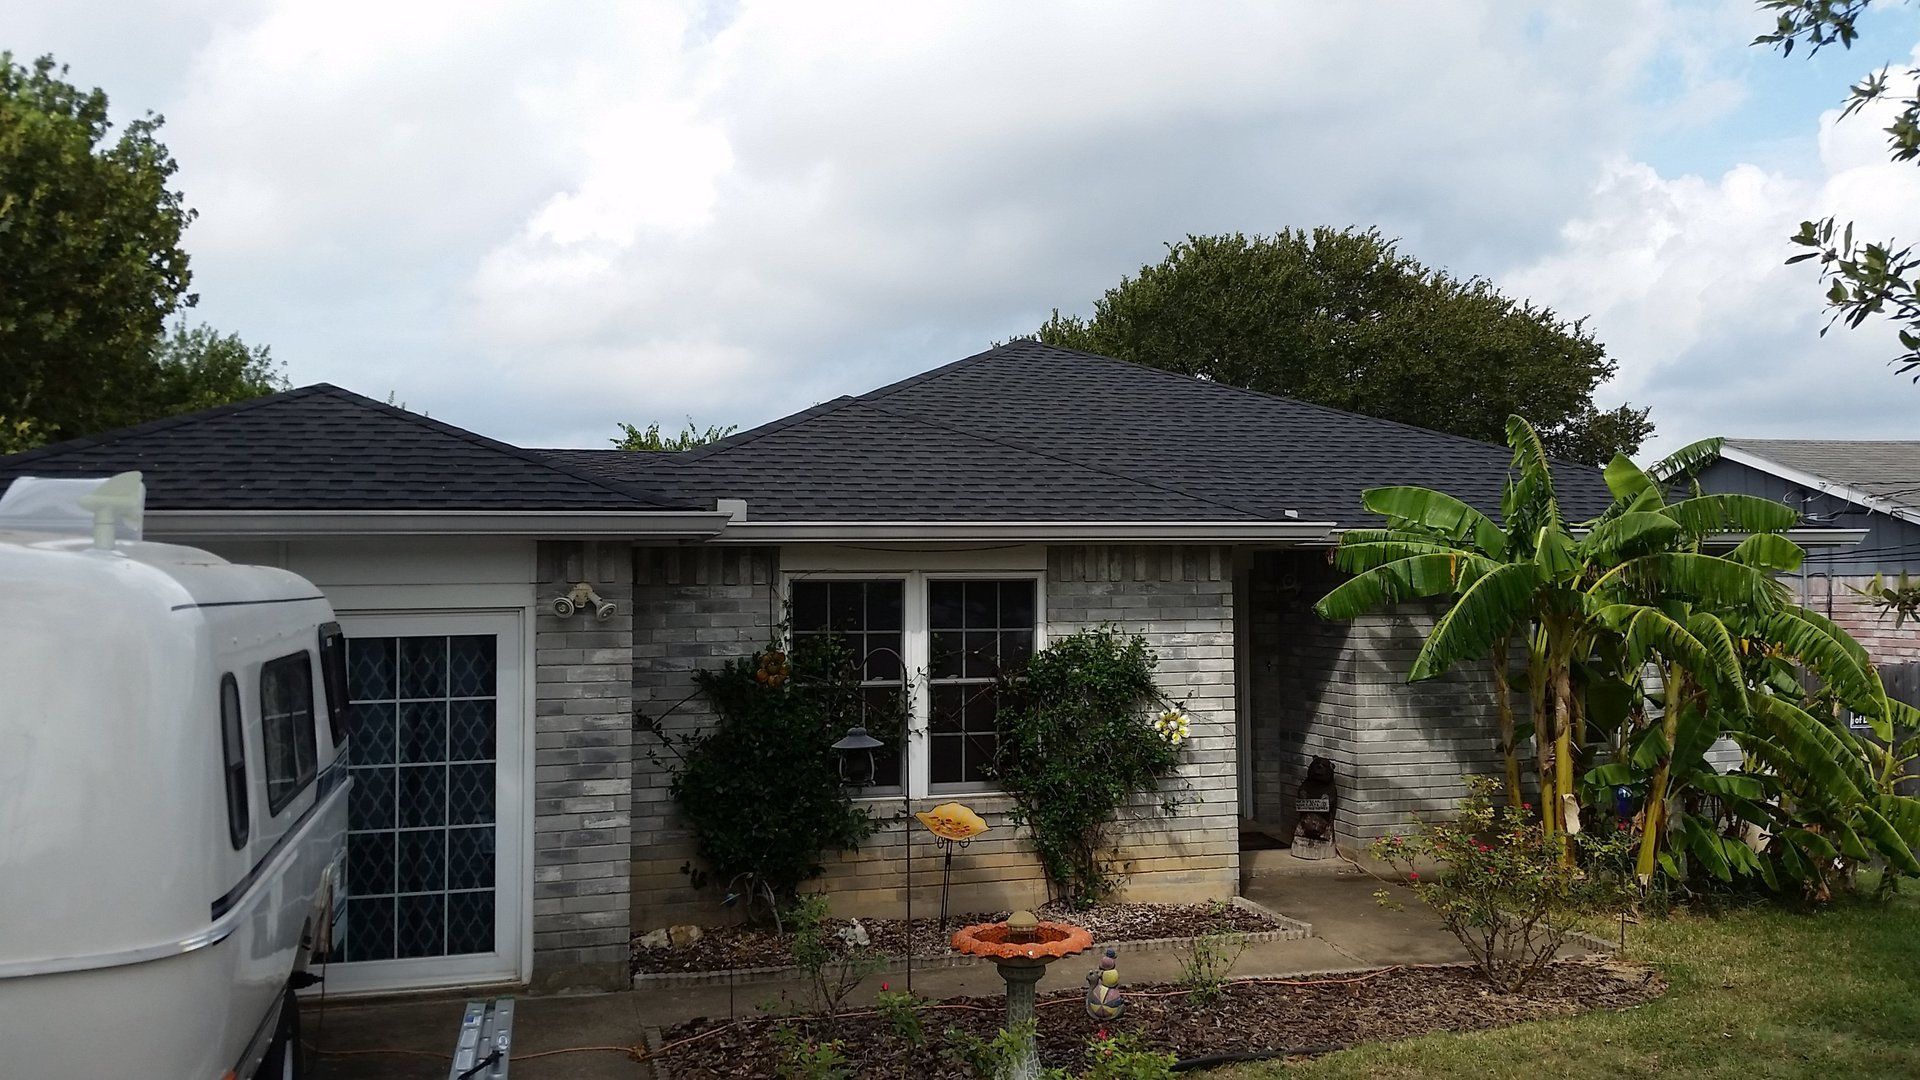 GAF Timberline HD Architectural Shingles - Color is Charcoal by Austin Roofing and Construction